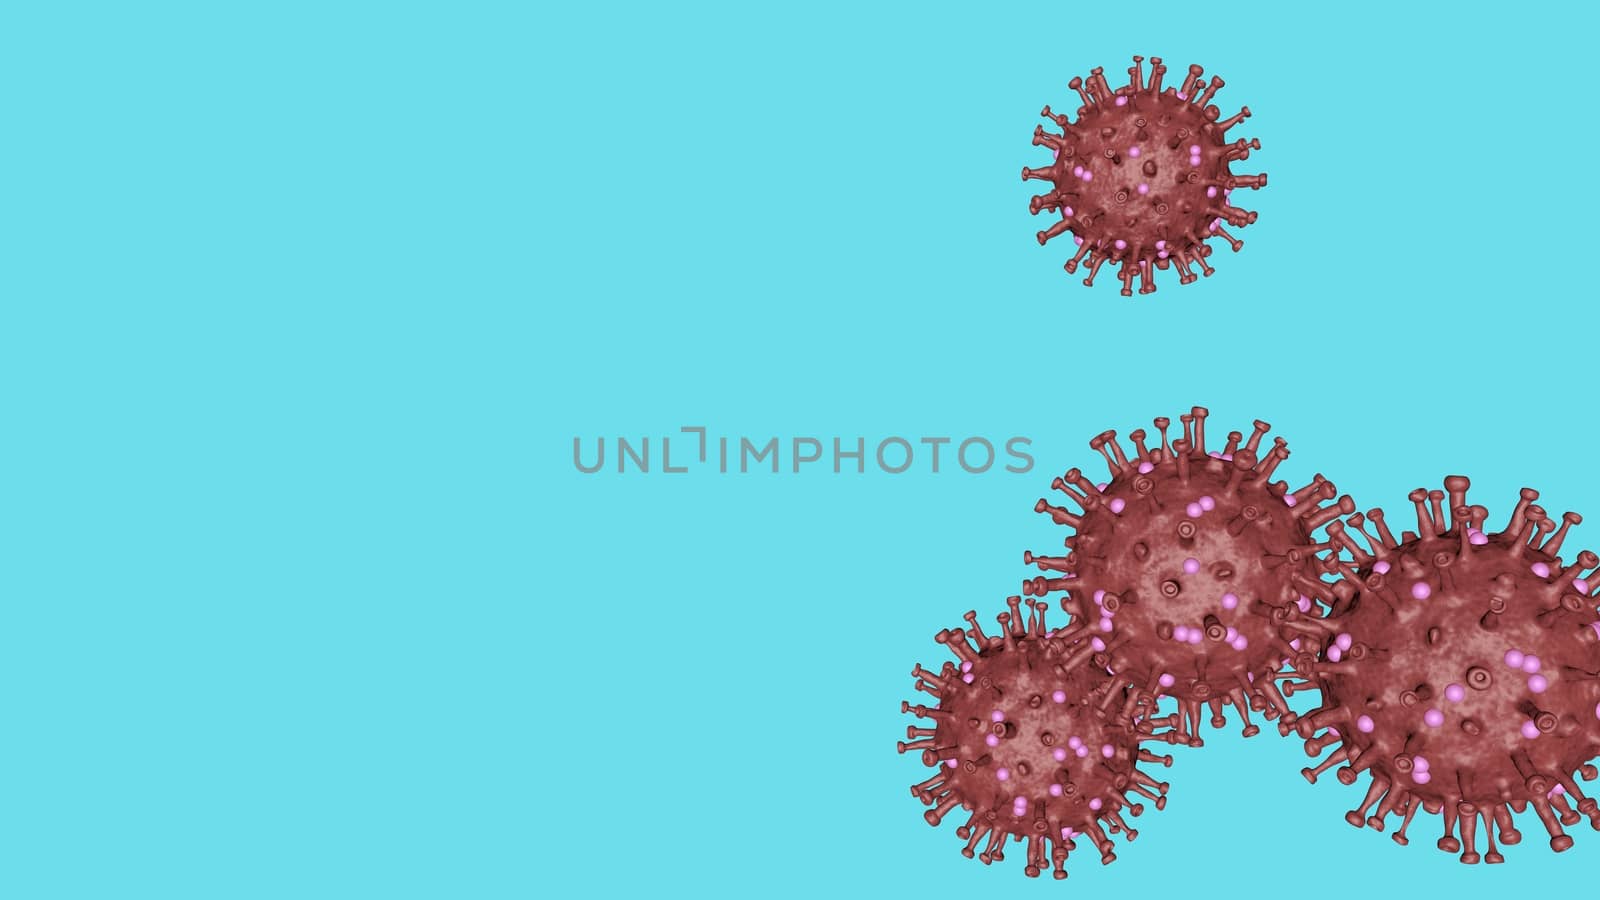 3D illustration of a virus particle. Closeup of a virus structure against clear background with copy space for text